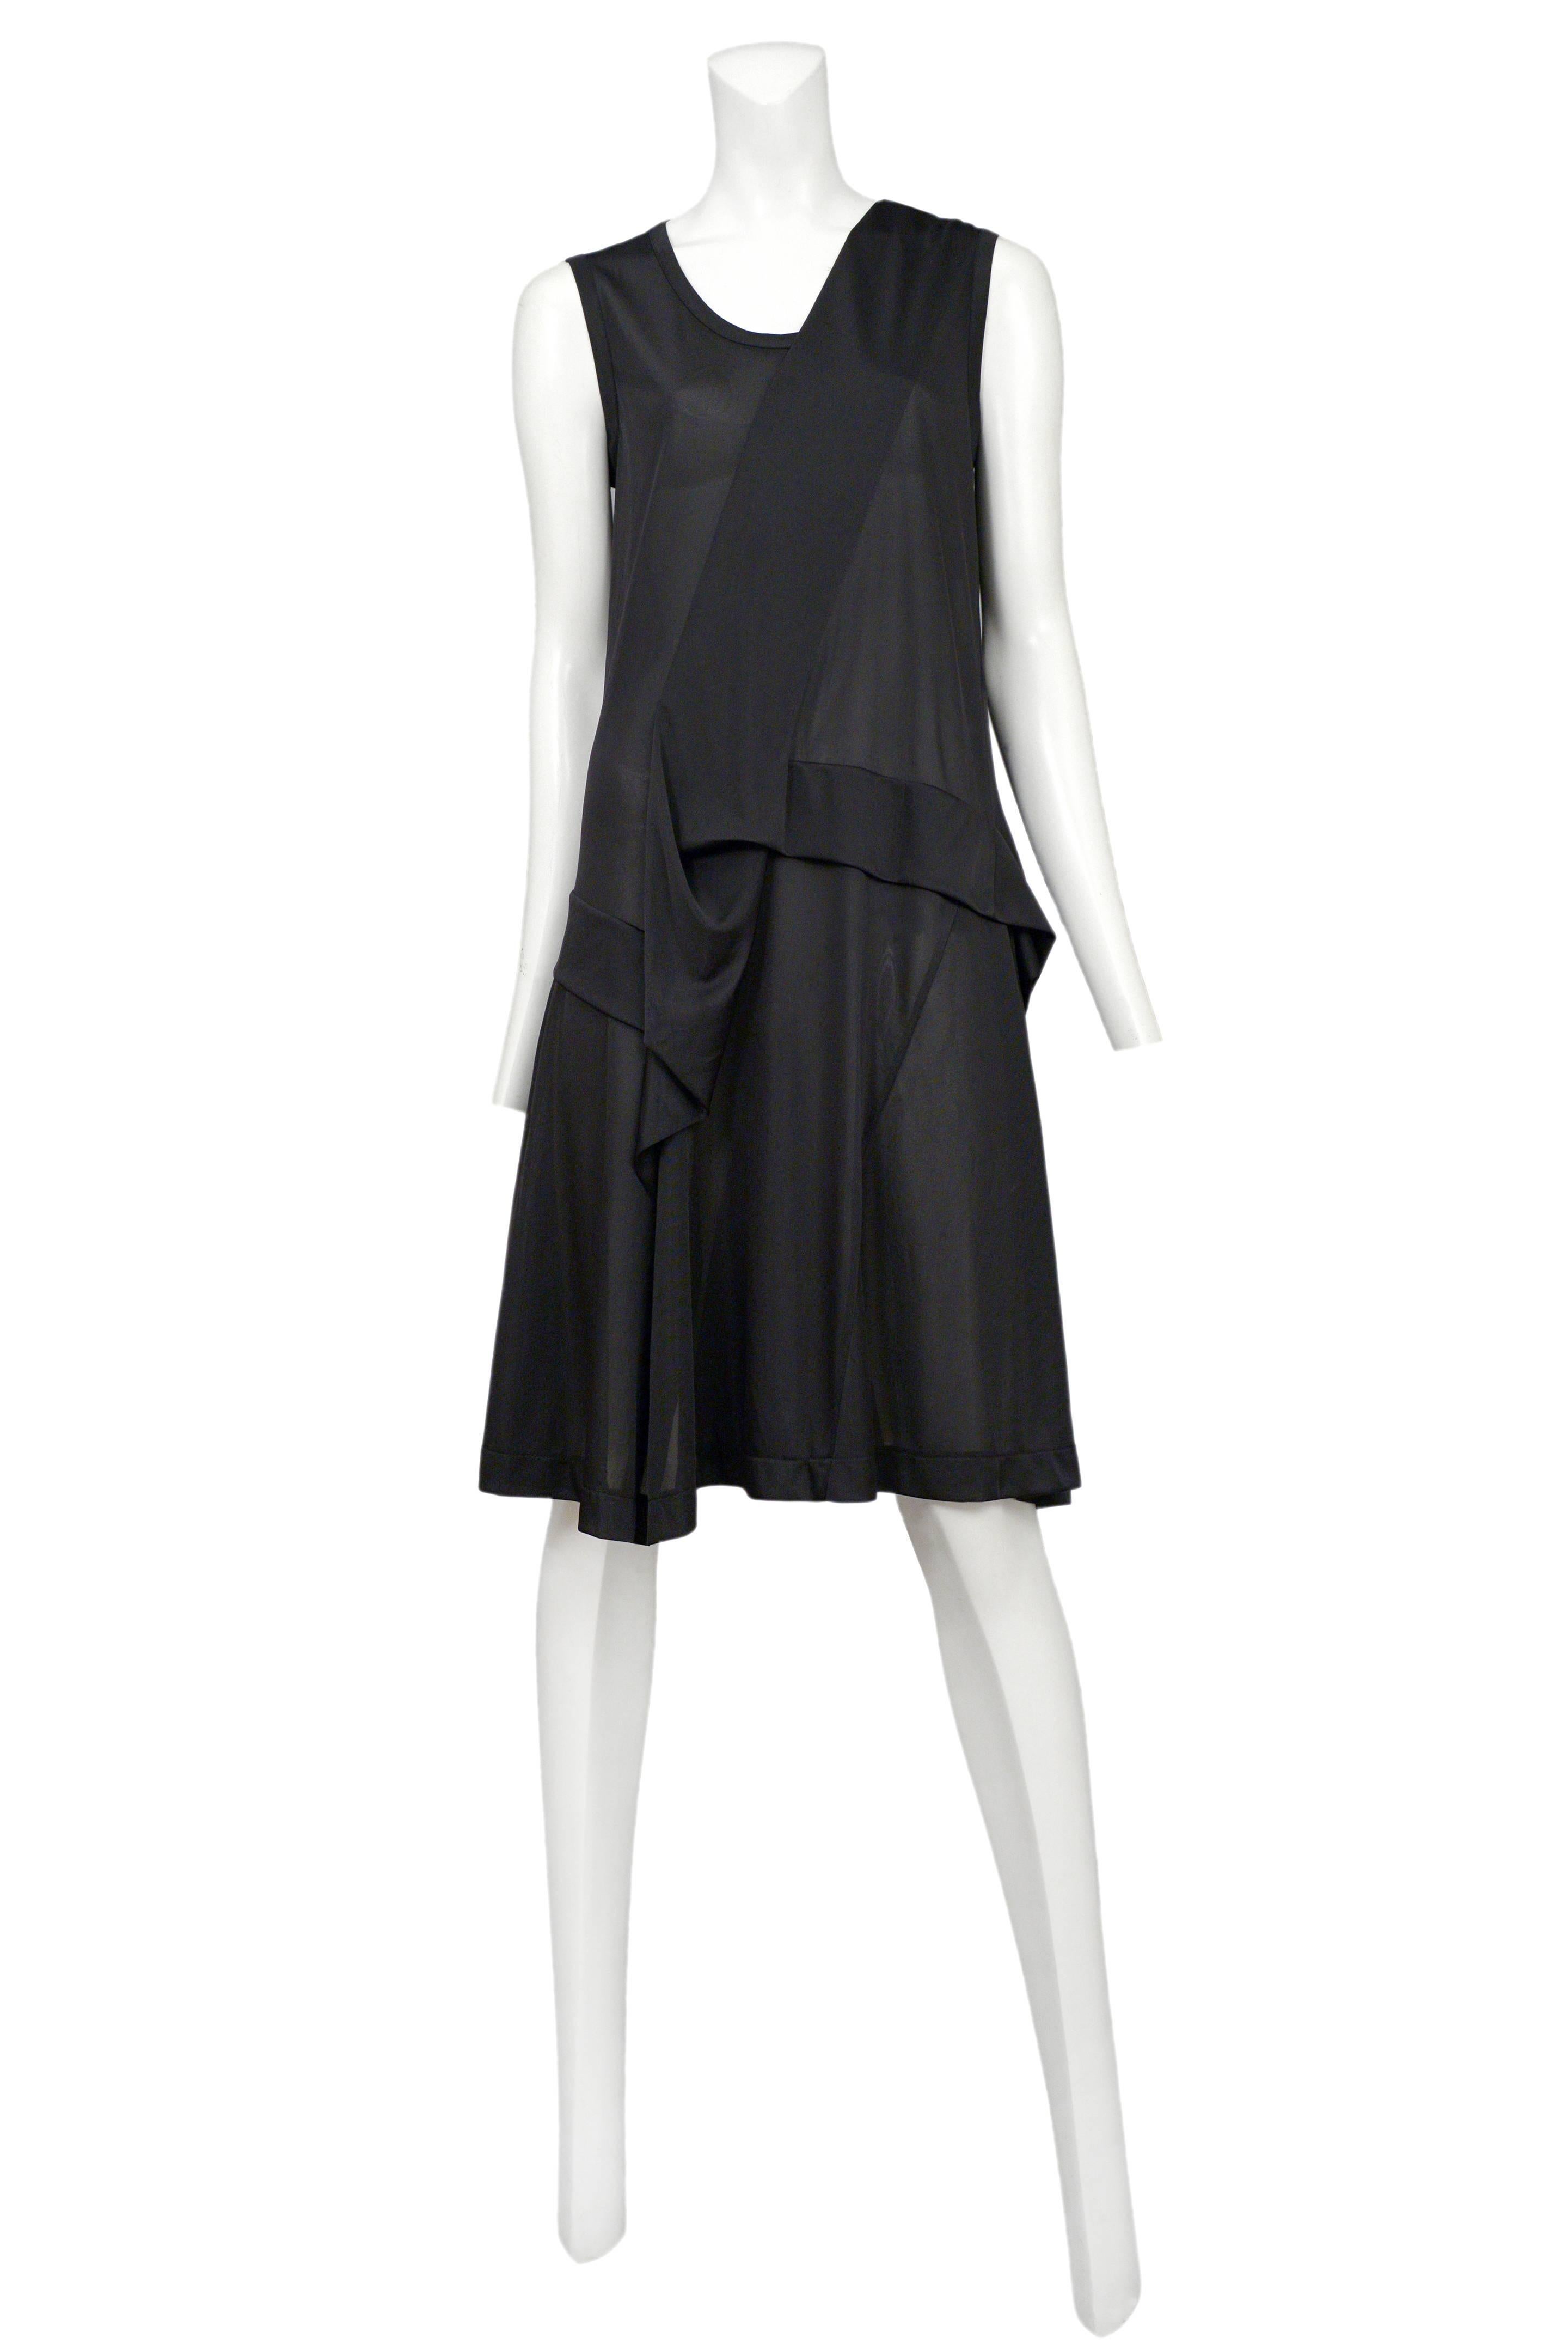 Vintage Junya Watanabe black sleeveless sheer tank dress featuring abstract draping across the center front and skirt. Circa Spring / Summer 1996.
Please inquire for additional images.